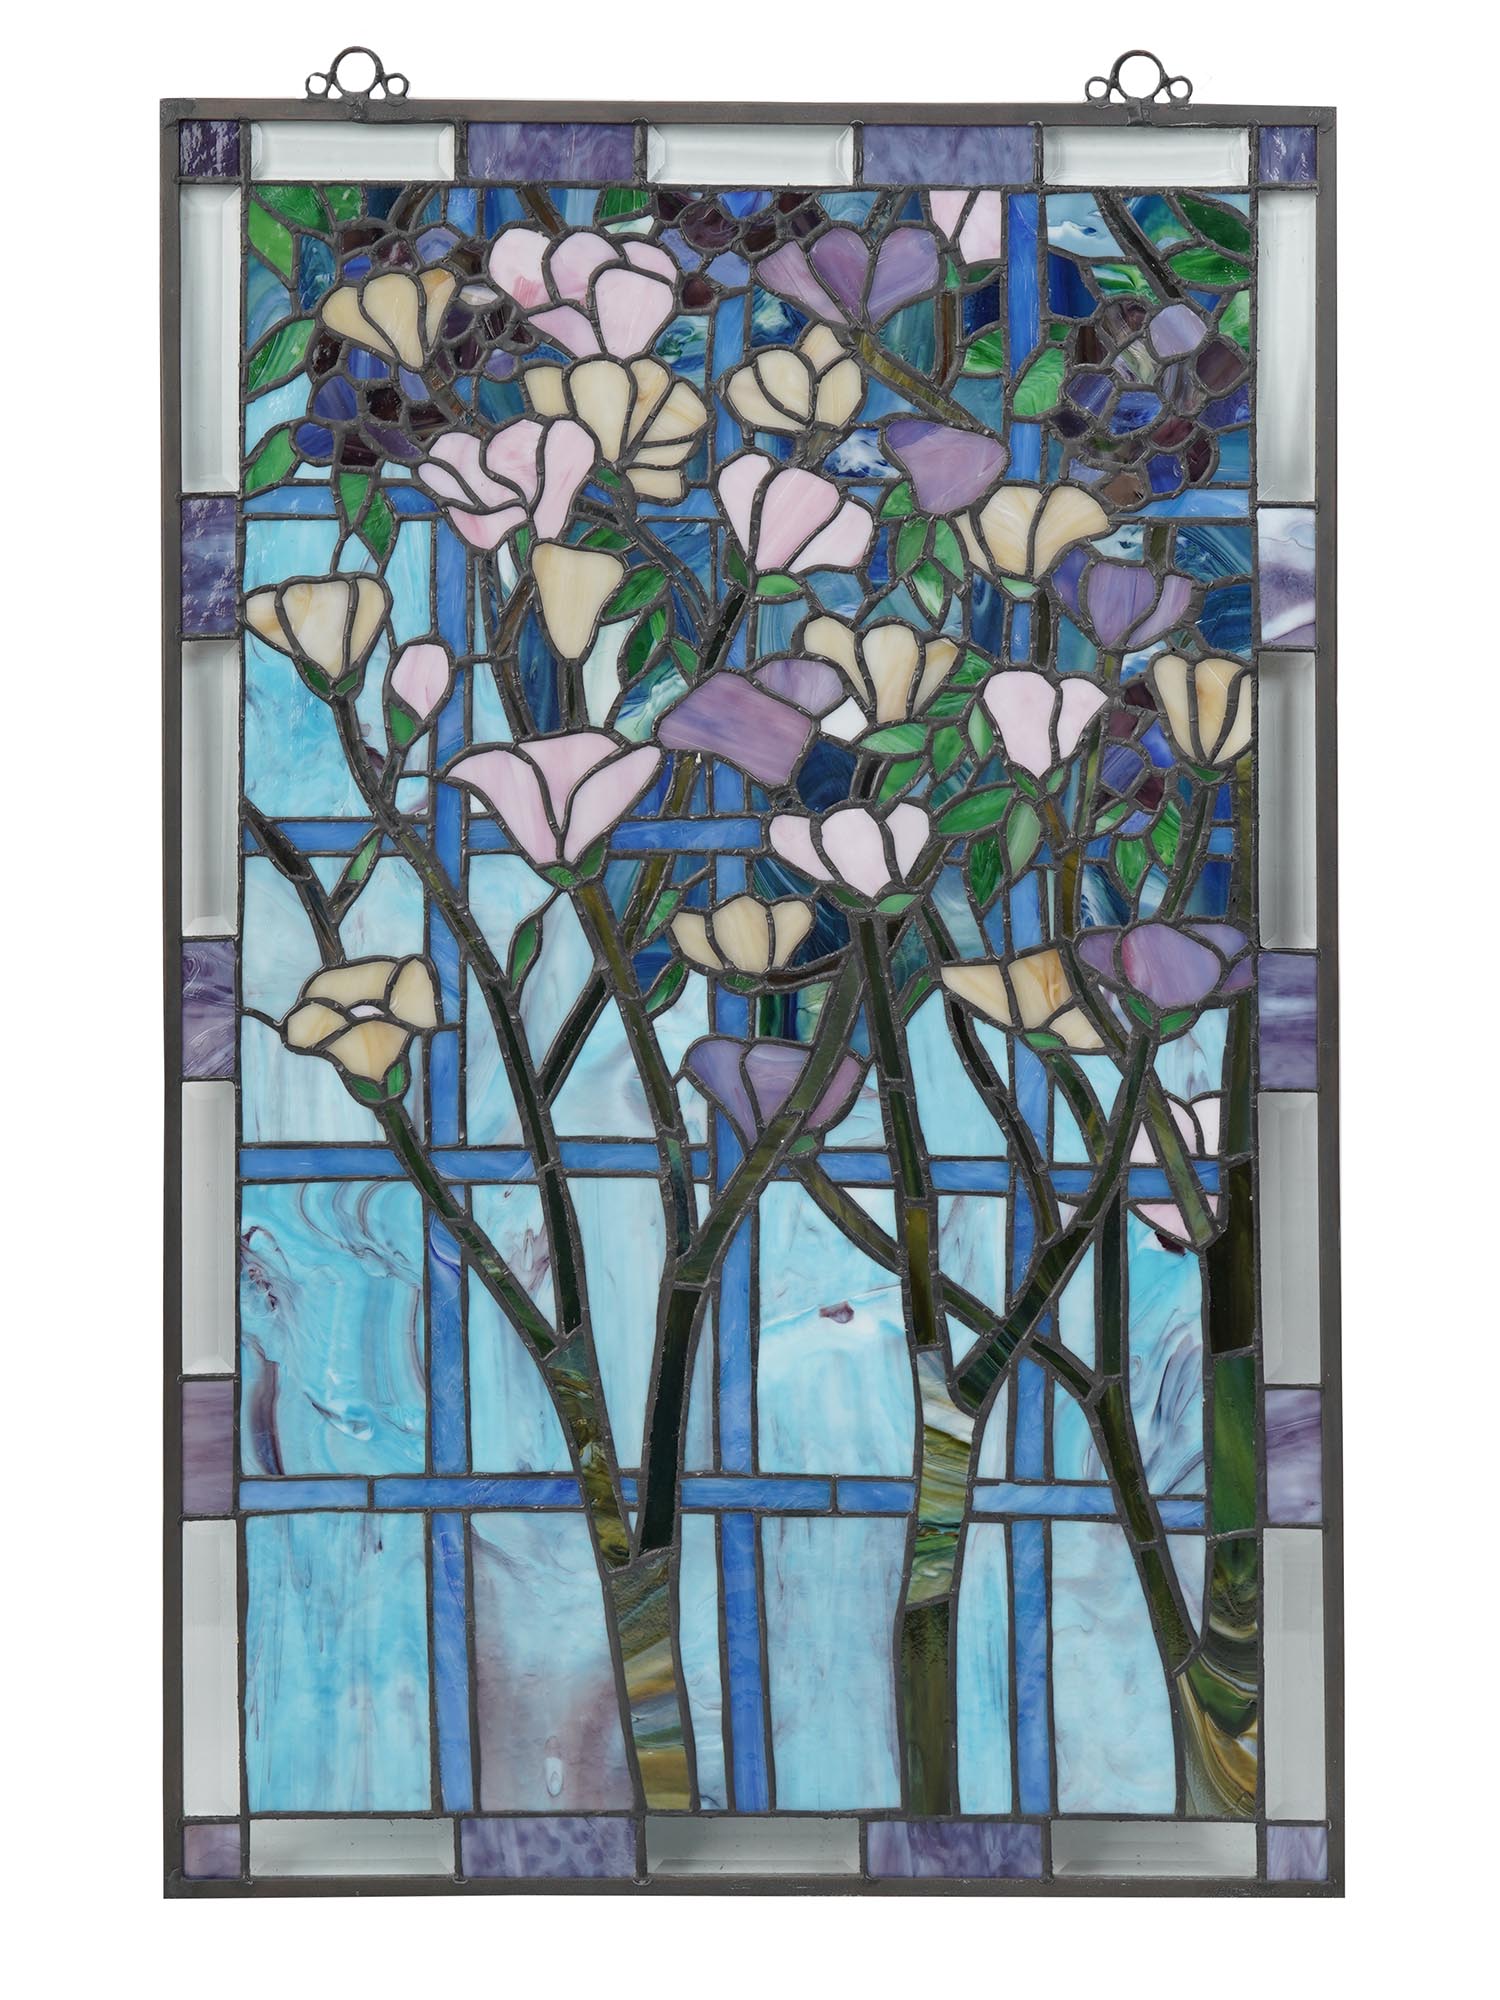 PAIR OF STAINED GLASS WINDOW PANELS FLOWERS TREES PIC-1